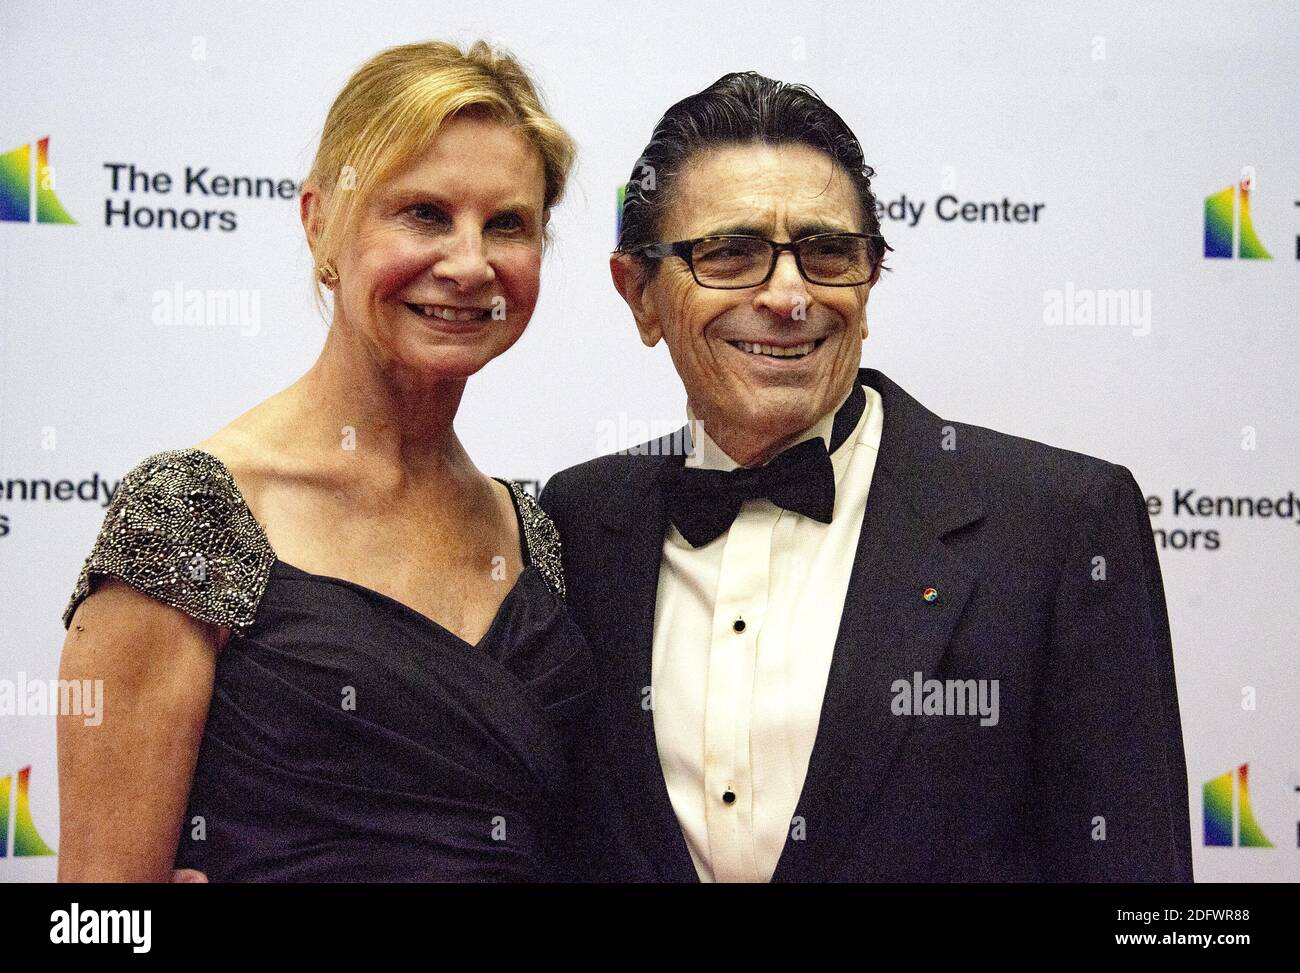 Edward Villella and wife, Linda Villella, arrive for the formal Artist's Dinner honoring the recipients of the 41st Annual Kennedy Center Honors hosted by United States Deputy Secretary of State John J. Sullivan at the US Department of State in Washington, DC, USA, on Saturday, December 1, 2018. The 2018 honorees are: singer and actress Cher; composer and pianist Philip Glass; Country music entertainer Reba McEntire; and jazz saxophonist and composer Wayne Shorter. This year, the co-creators of Hamilton, writer and actor Lin-Manuel Miranda, director Thomas Kail, choreographer Andy Blankenbuehl Stock Photo